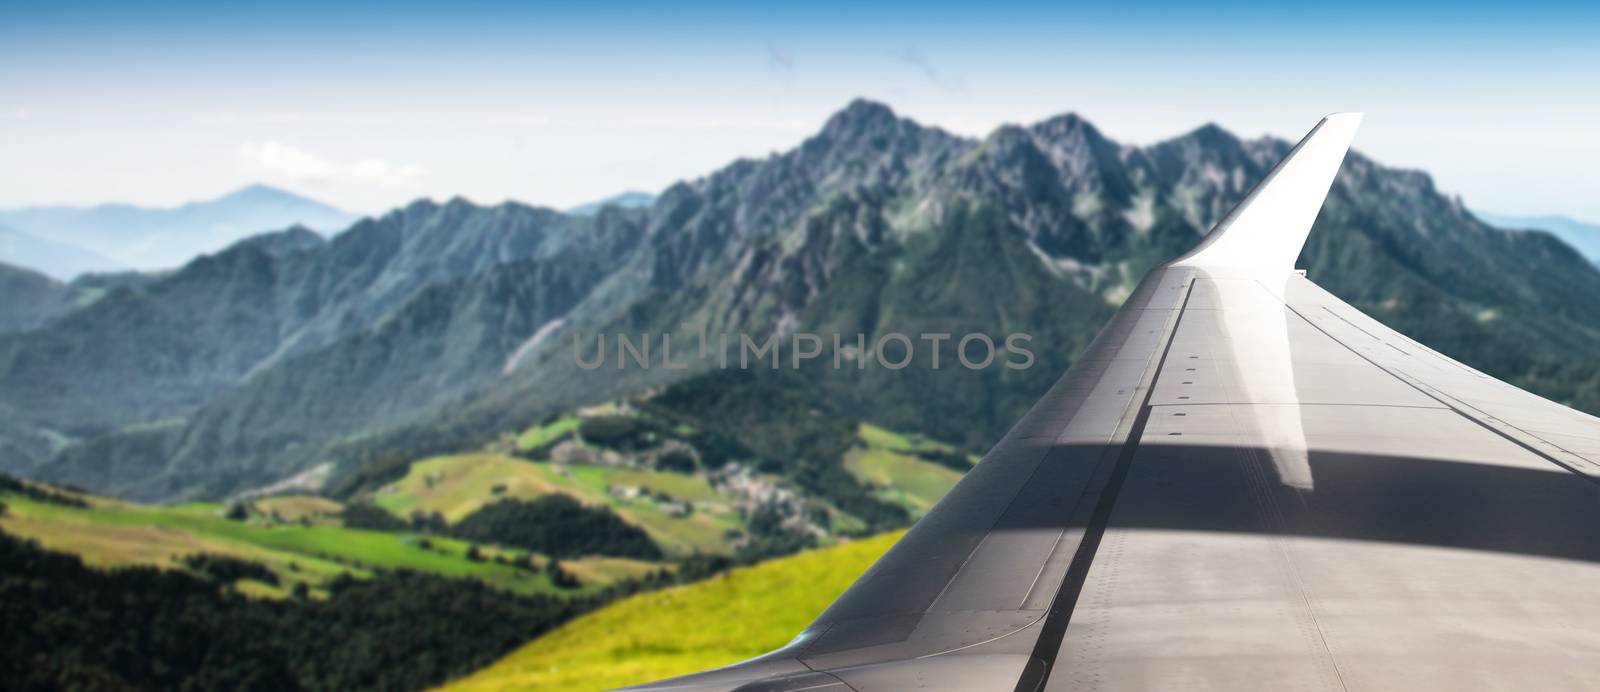 Plane flying over mountainous area by photobeps